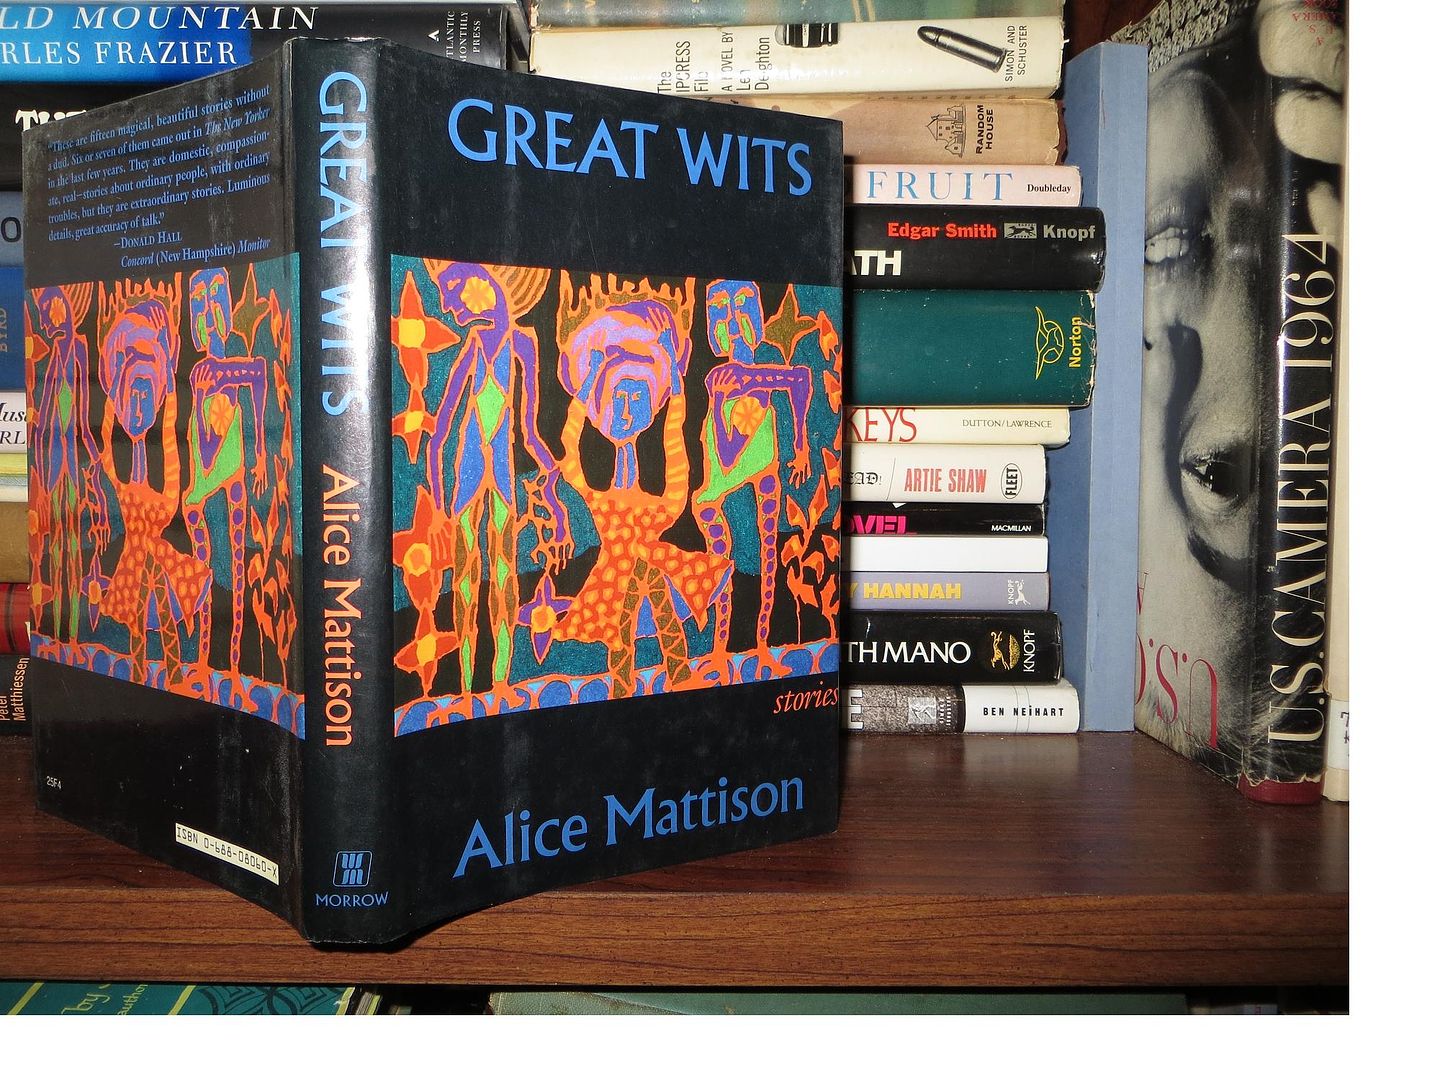 MATTISON, ALICE - Great Wits Stories